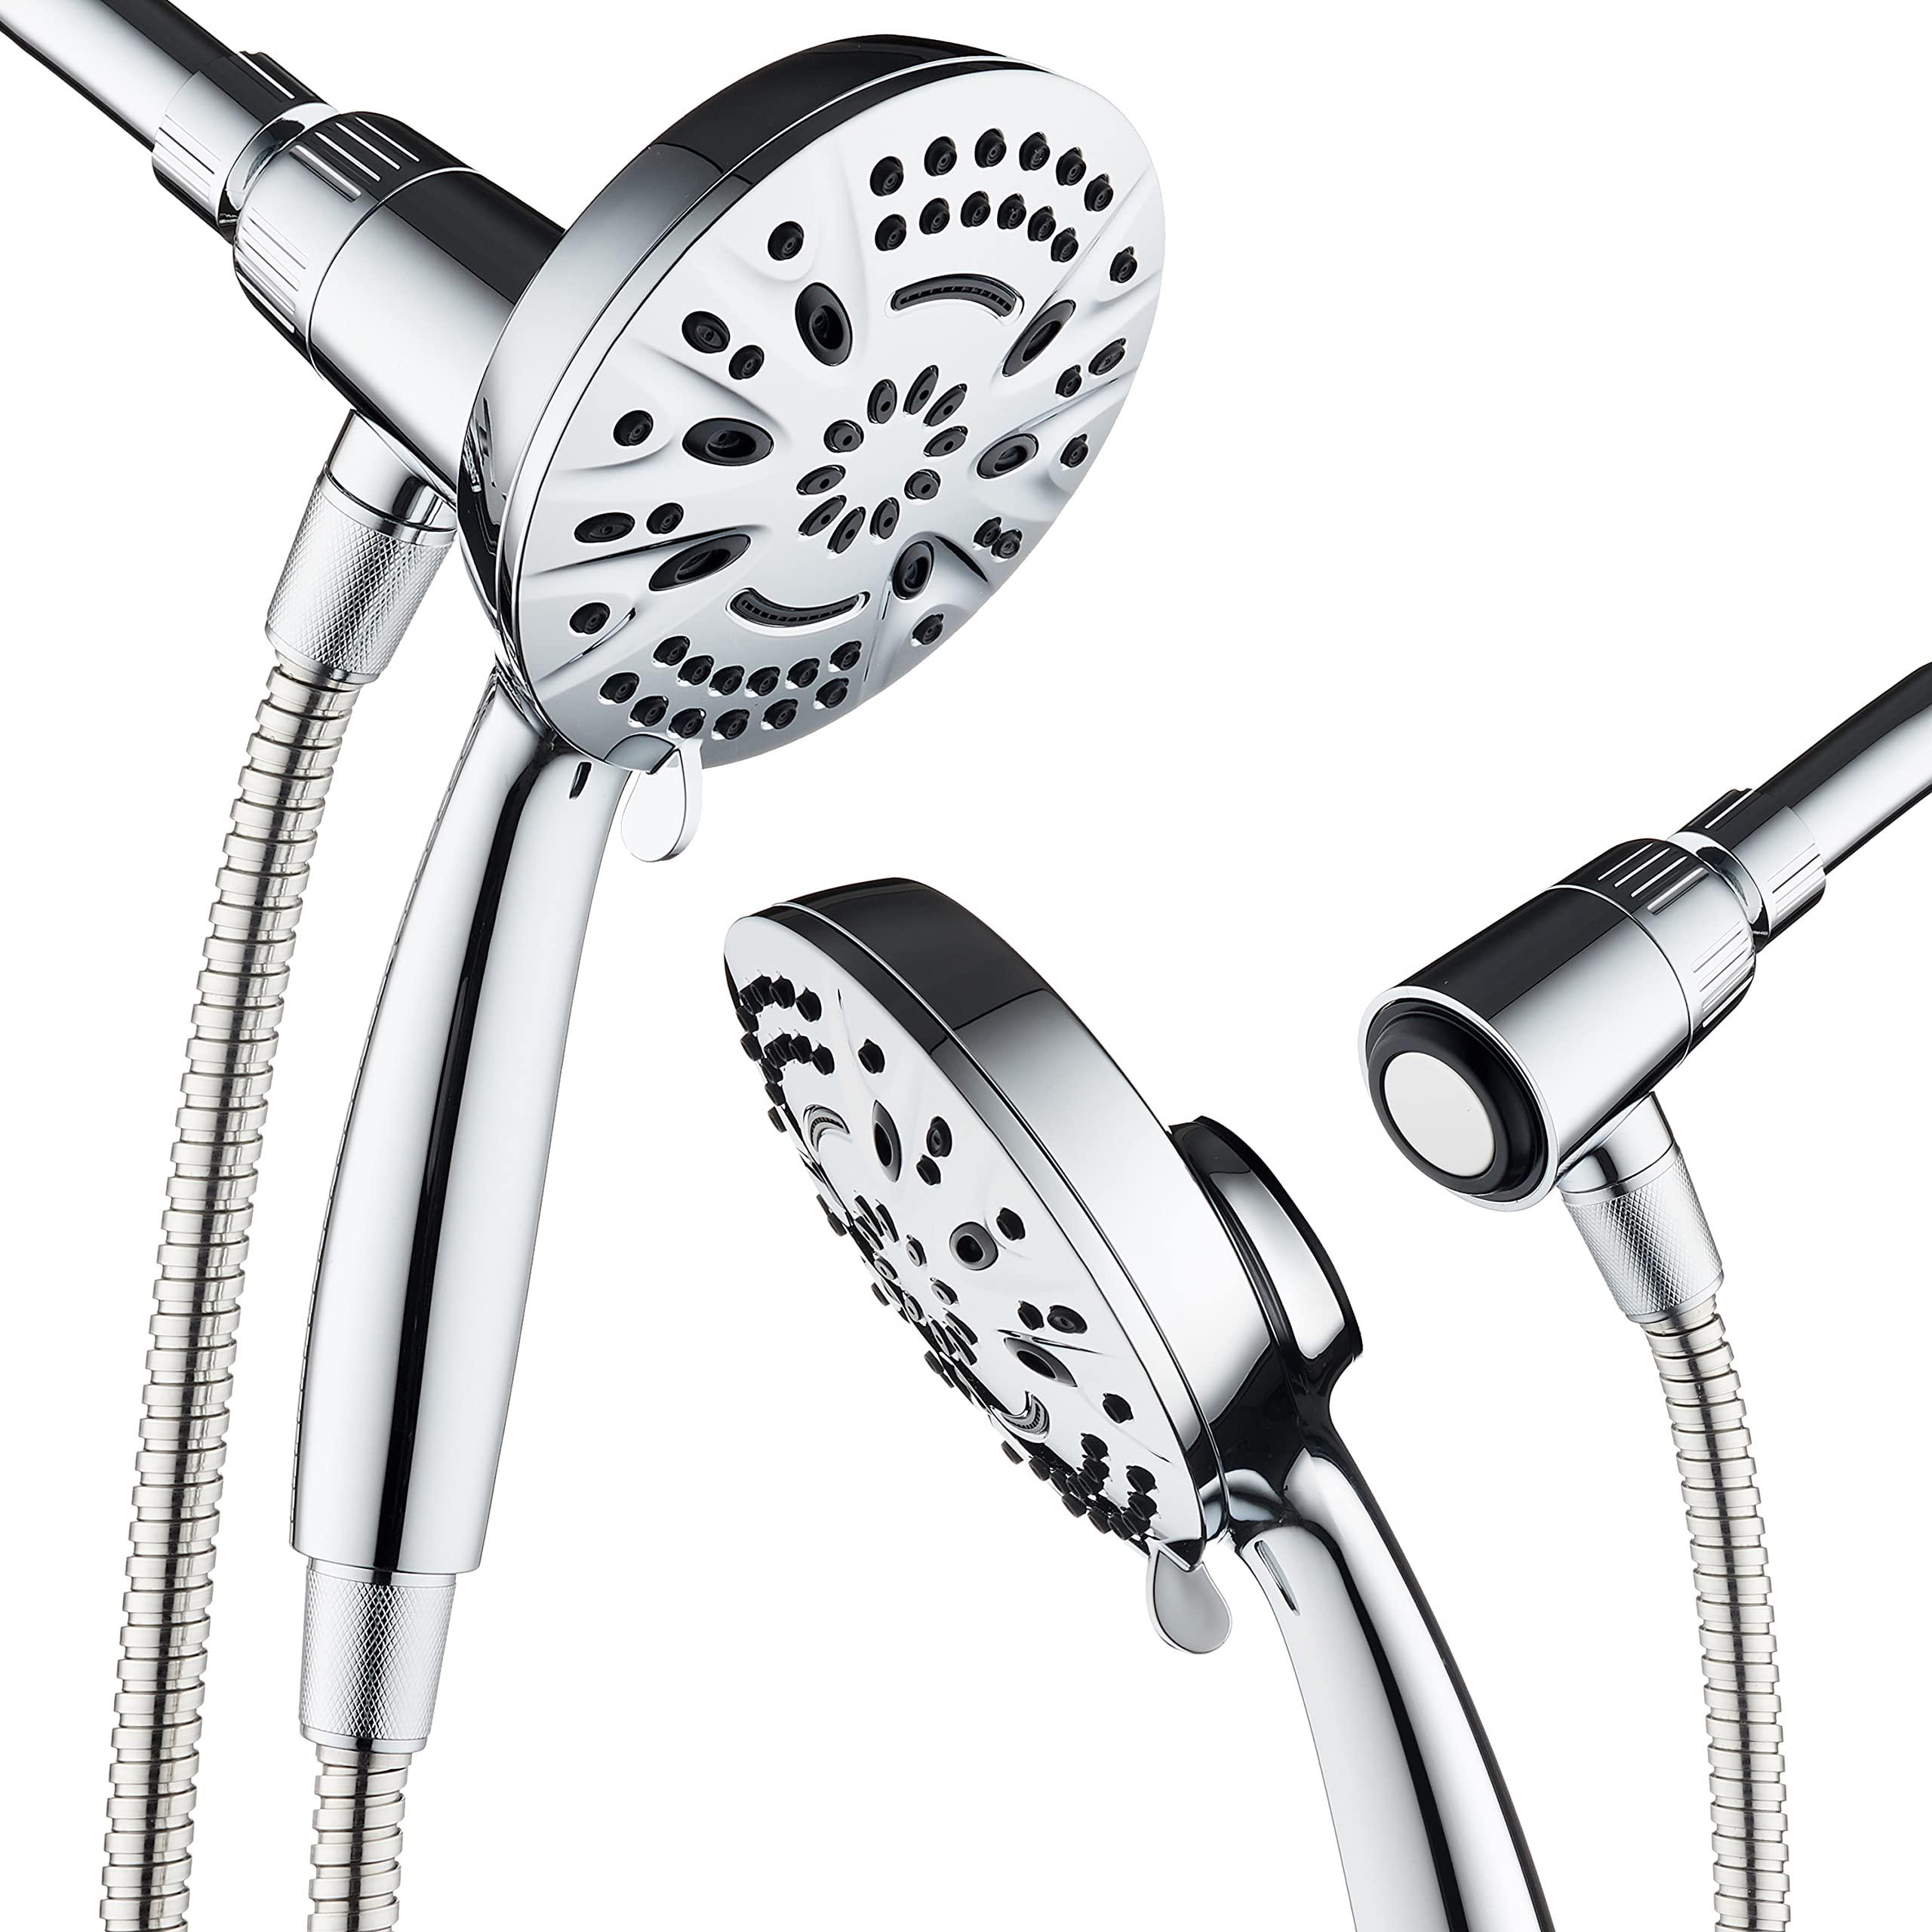 aquadance new magnetic guidance docking system - high-pressure 8-setting handheld shower head with giant 5 inch face, magneti